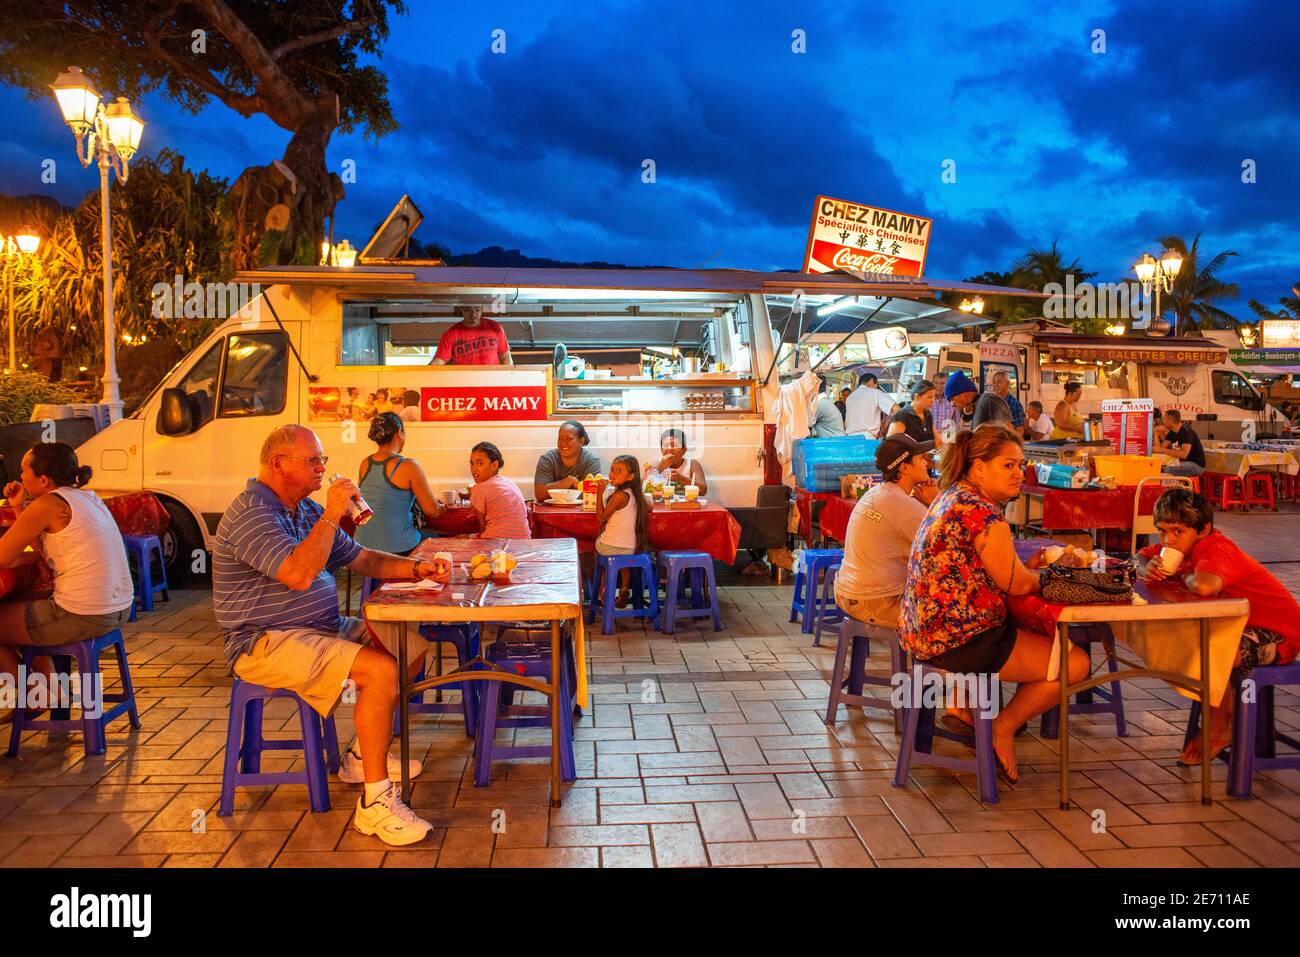 February 2020 - Outdoor dining in a plaza among roulotte food vans at  Papeete on the island of Tahiti, Tahiti Nui, Society Islands, French  Polynesia, South Pacific. Food inside a Les Roulottes